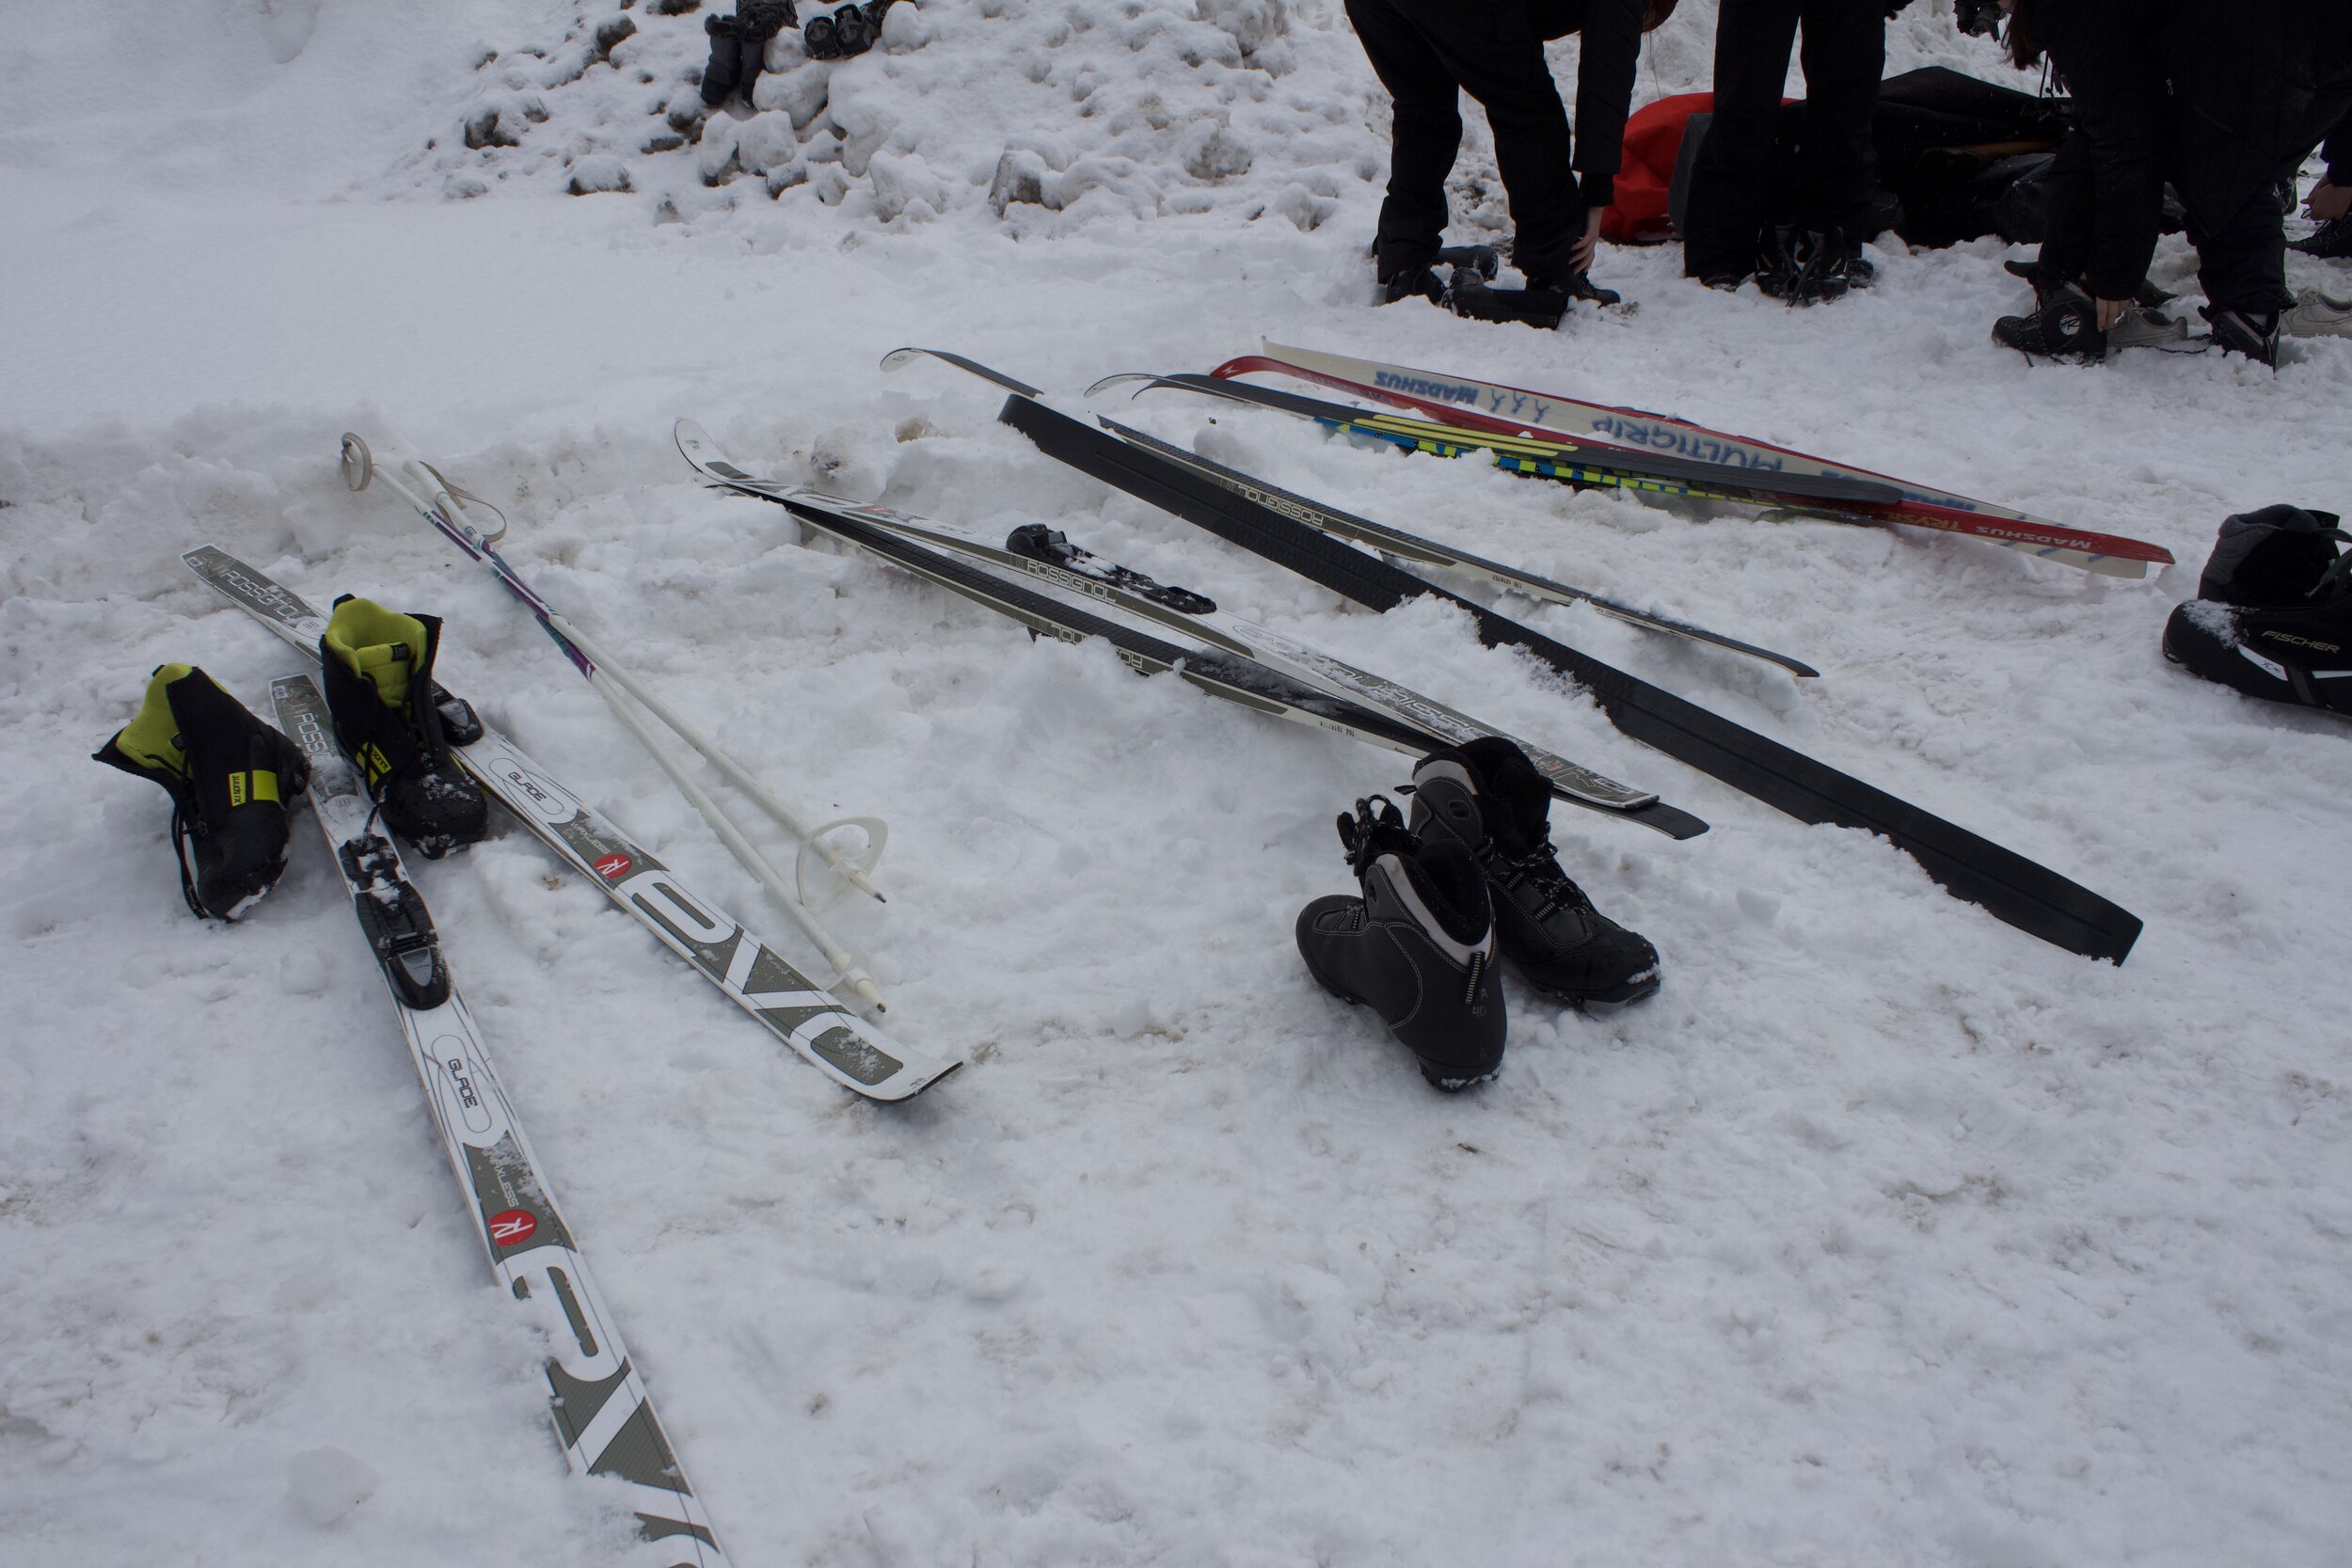   Some of the free rental gear waiting to be put on by an excited skier.  